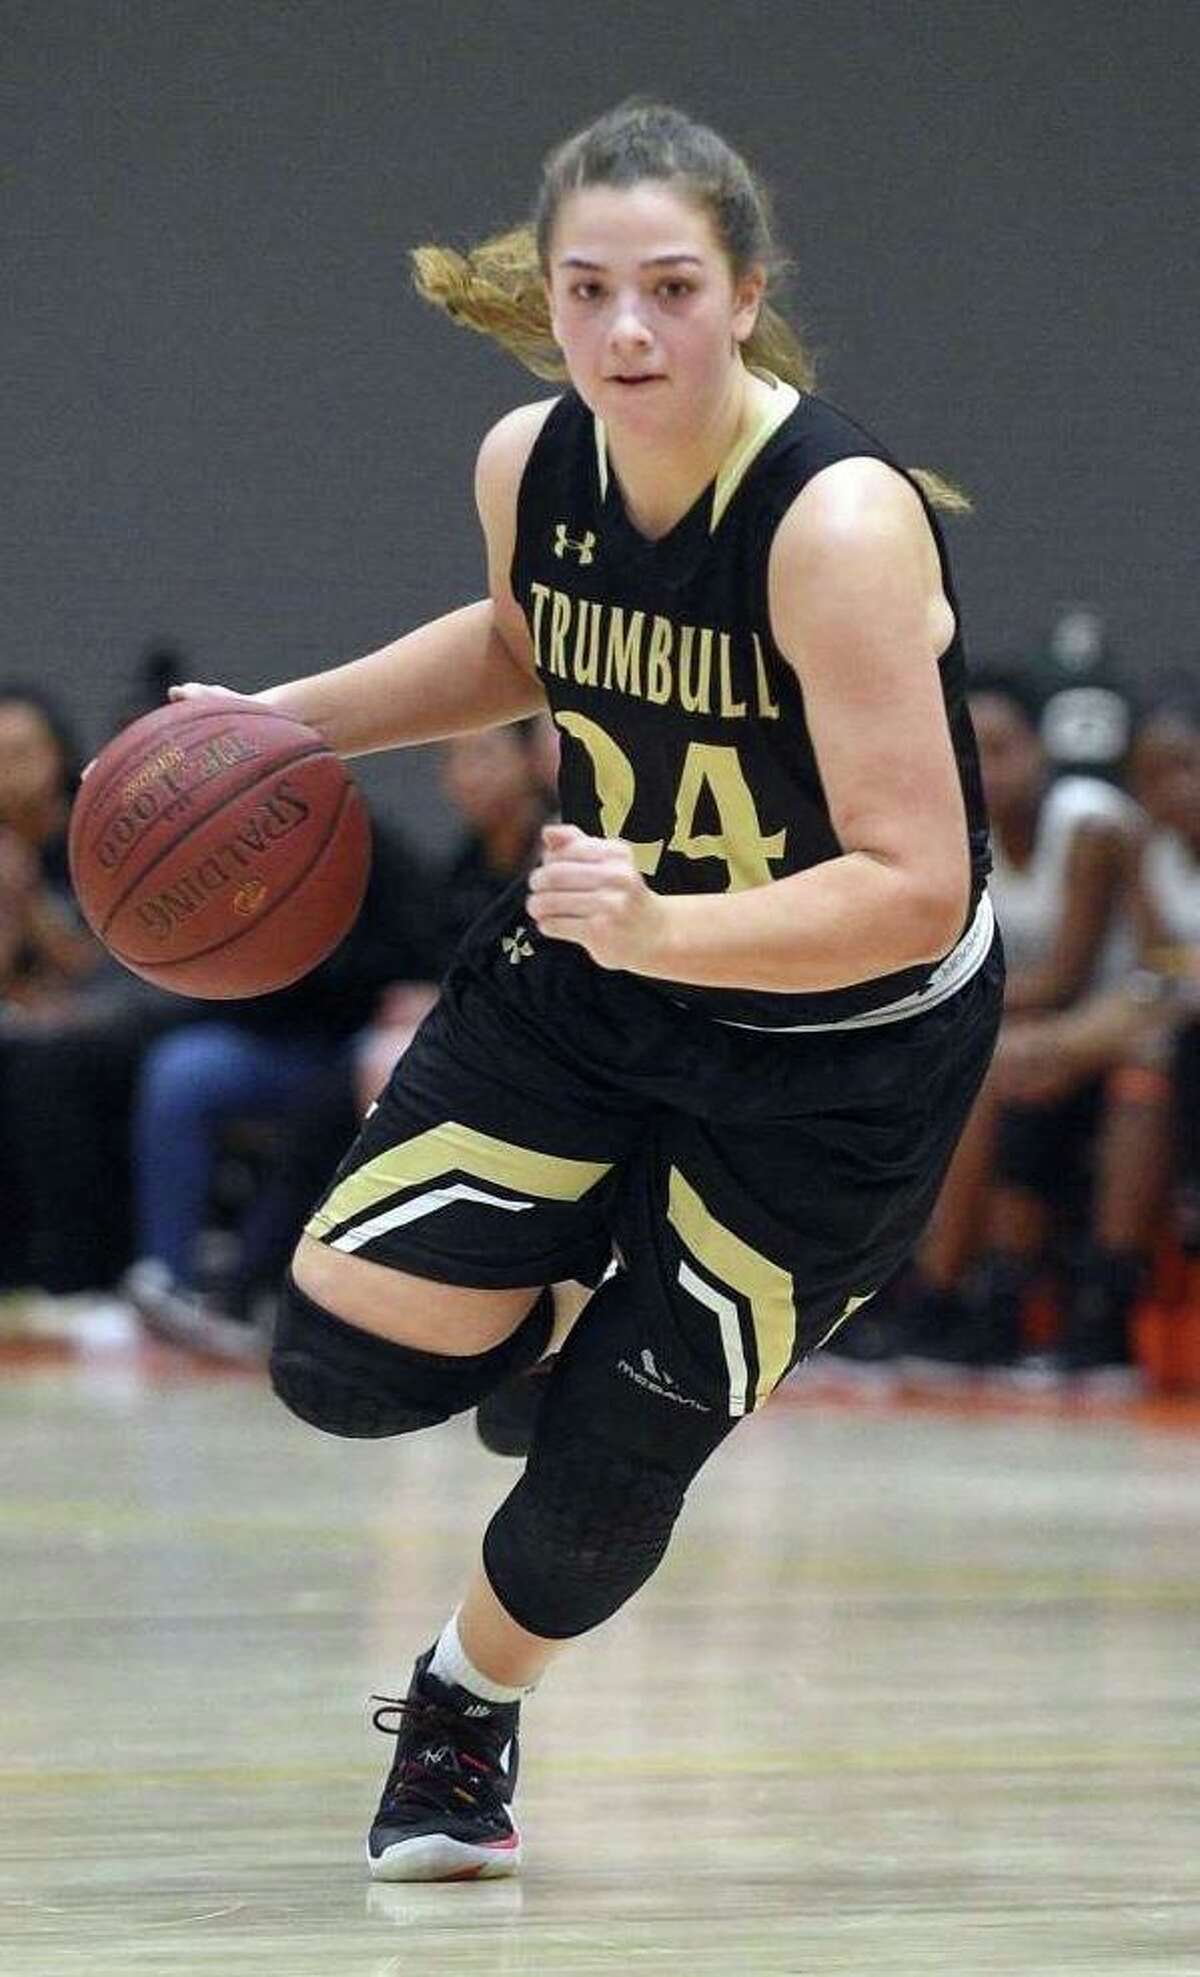 Cassi Barbato brings the ball up for Trumbull during its game against Stamford.